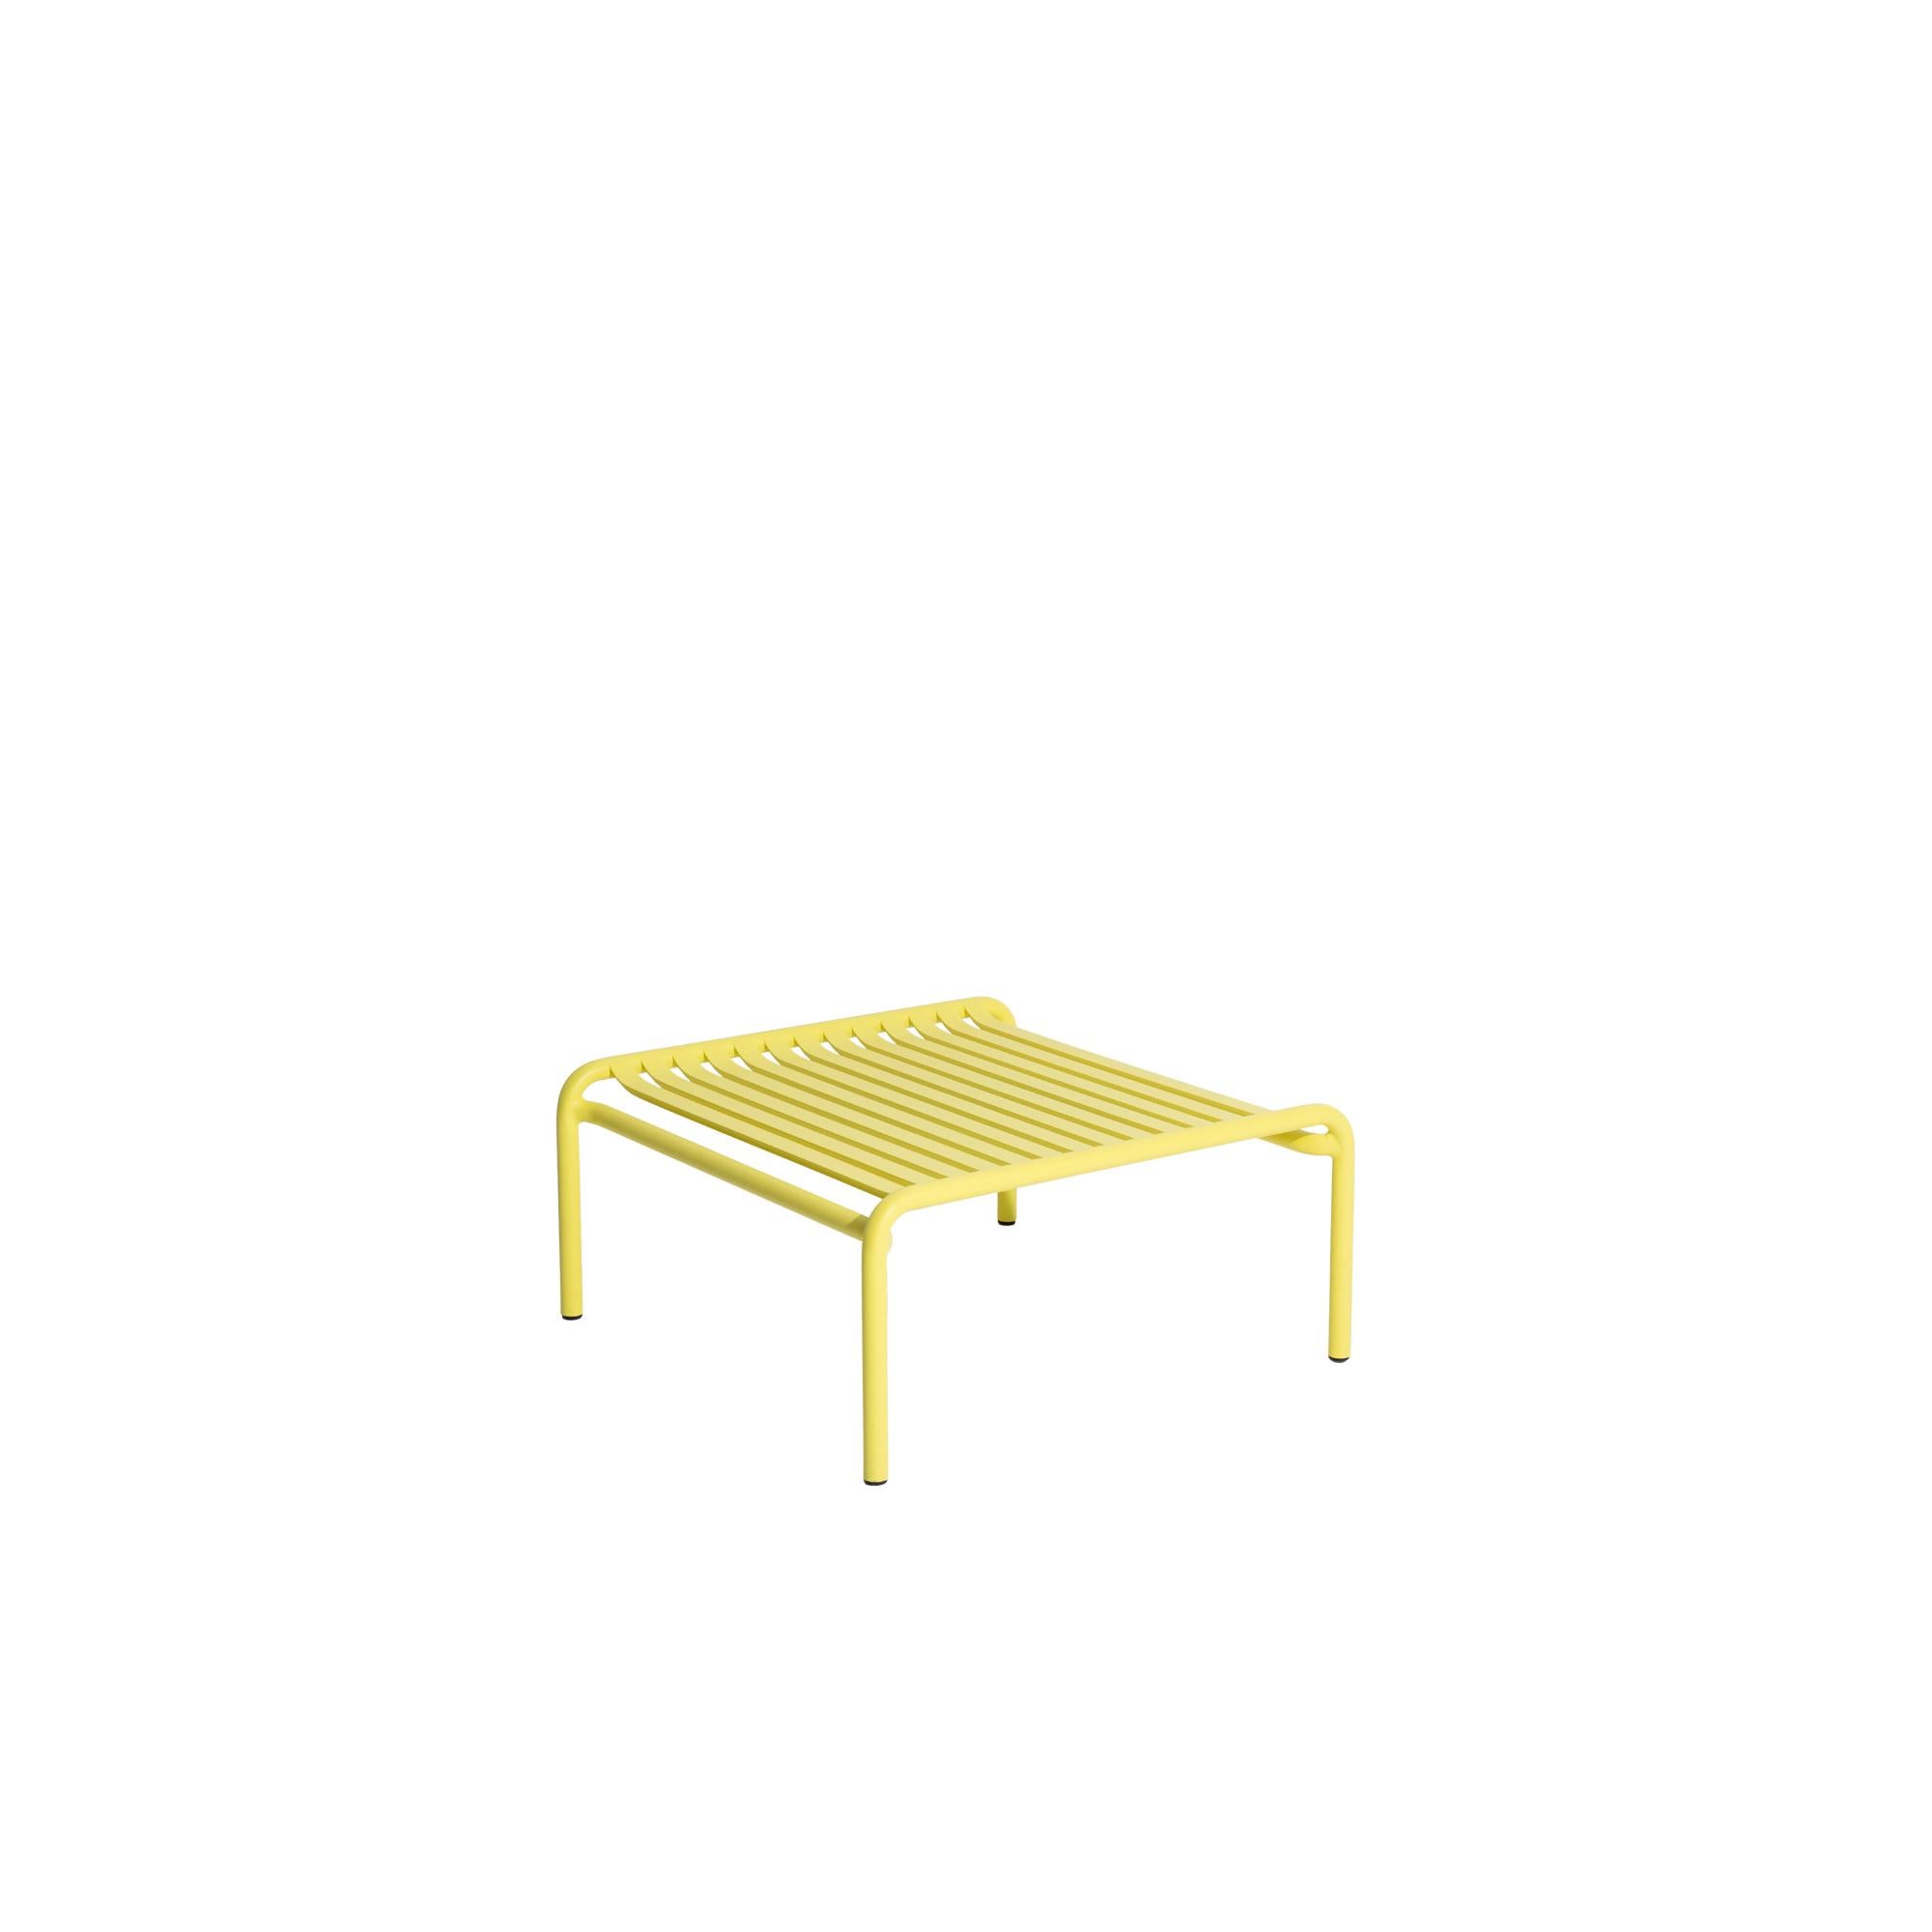 Petite Friture Week-End Coffee Table in Yellow Aluminium by Studio BrichetZiegler, 2017

The week-end collection is a full range of outdoor furniture, in aluminium grained epoxy paint, matt finish, that includes 18 functions and 8 colours for the